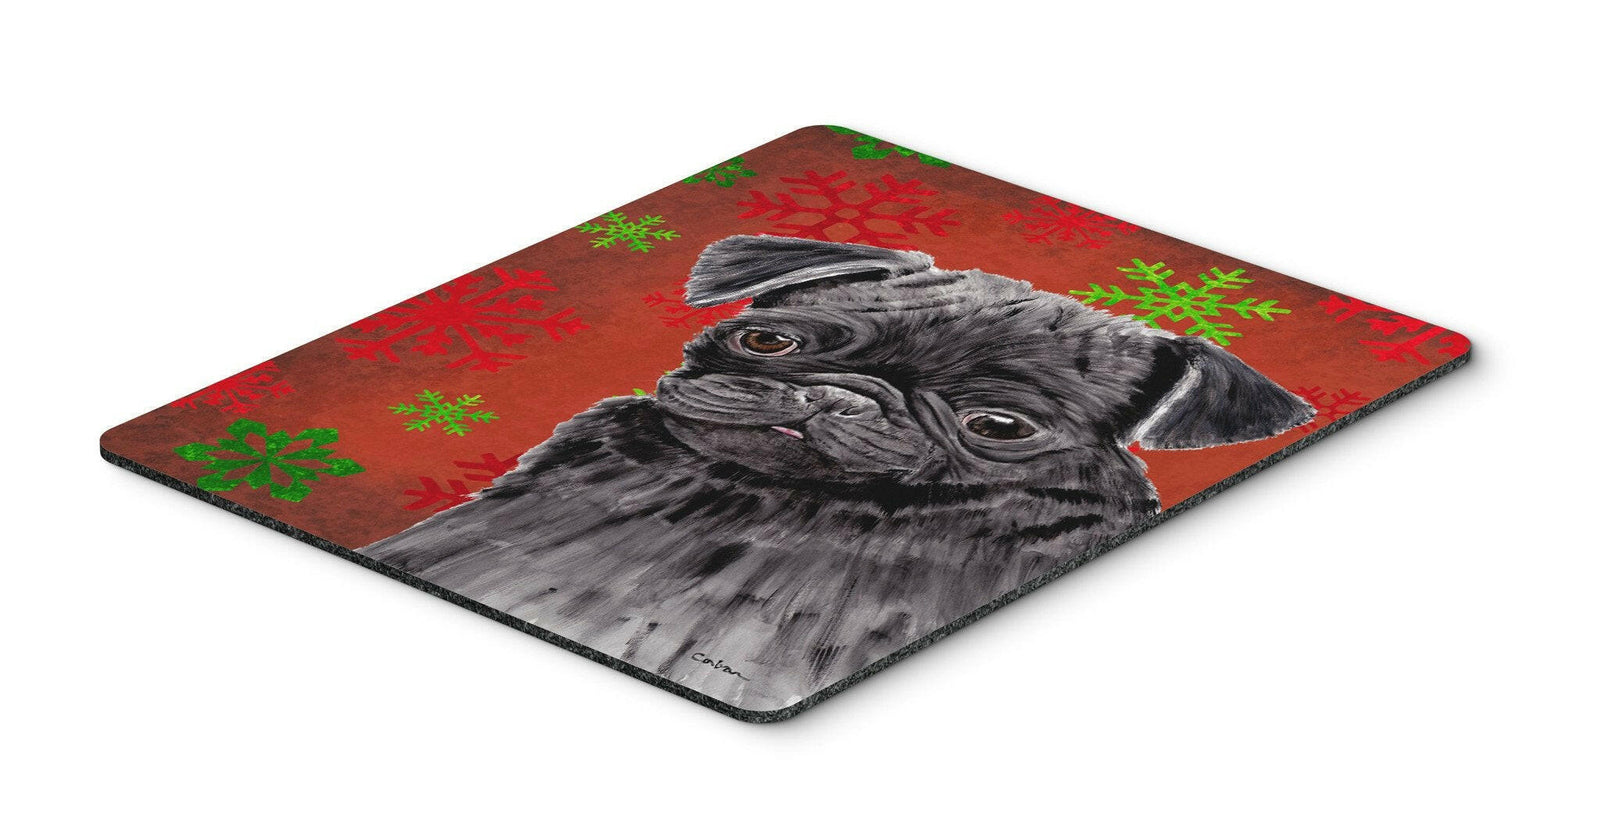 Pug Red and Green Snowflakes Holiday Christmas Mouse Pad, Hot Pad or Trivet by Caroline's Treasures